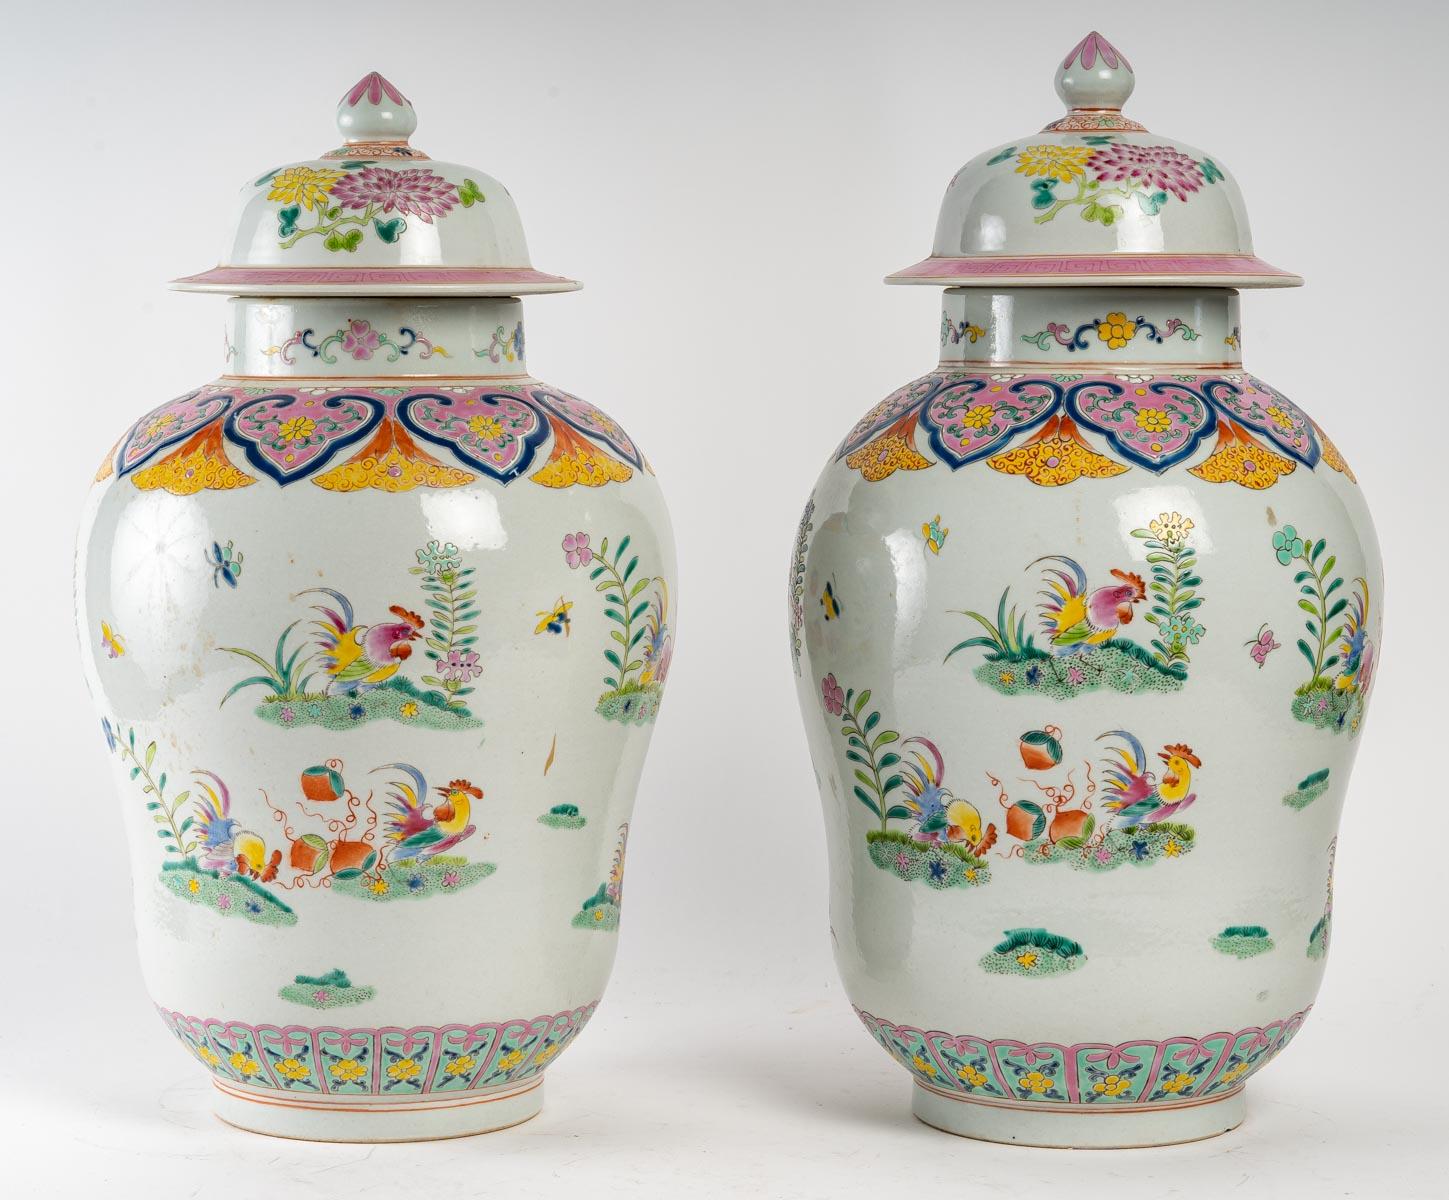 Early 20th Century Pair of Porcelain Covered Vases